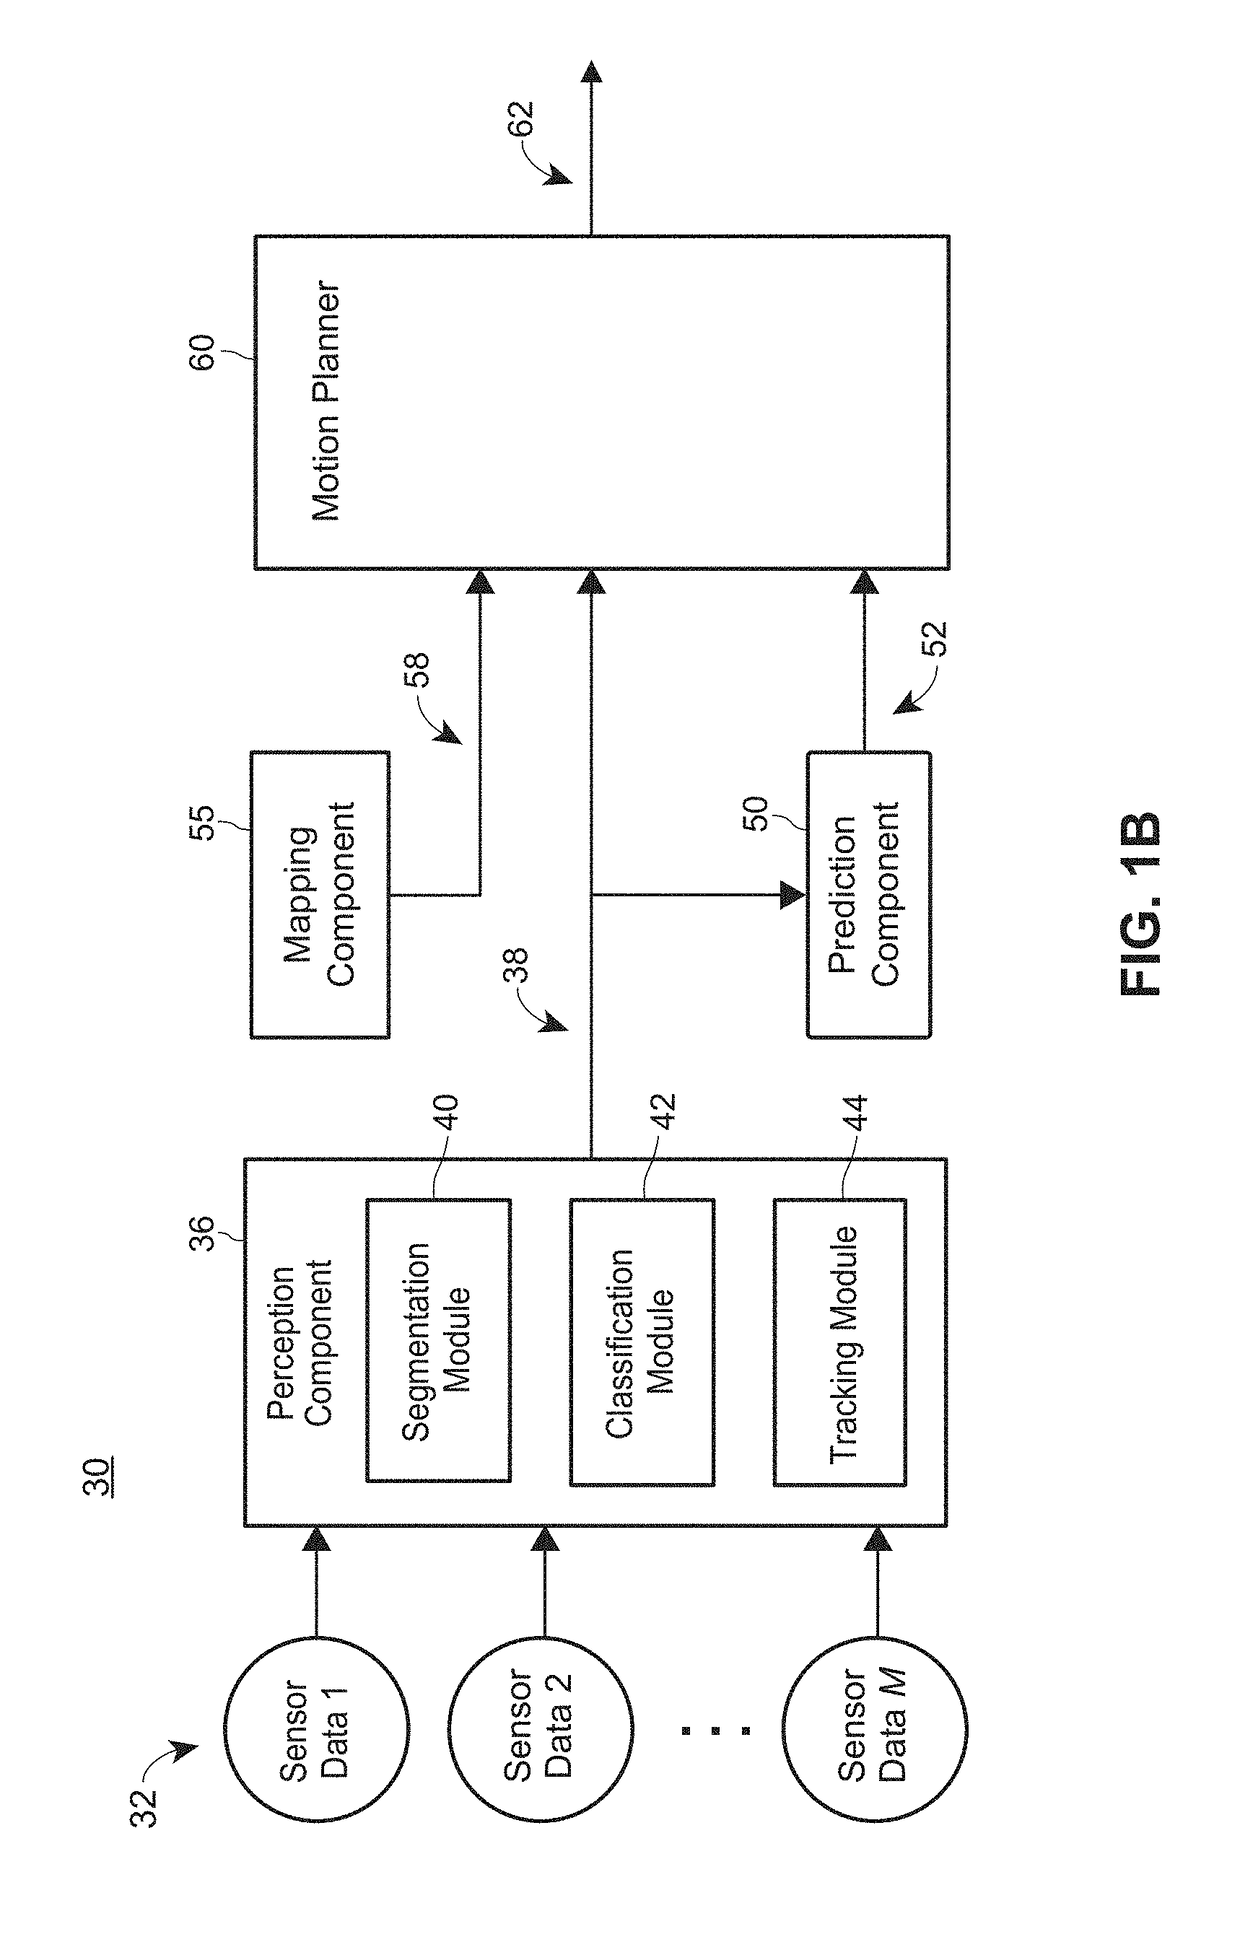 Object identification and labeling tool for training autonomous vehicle controllers